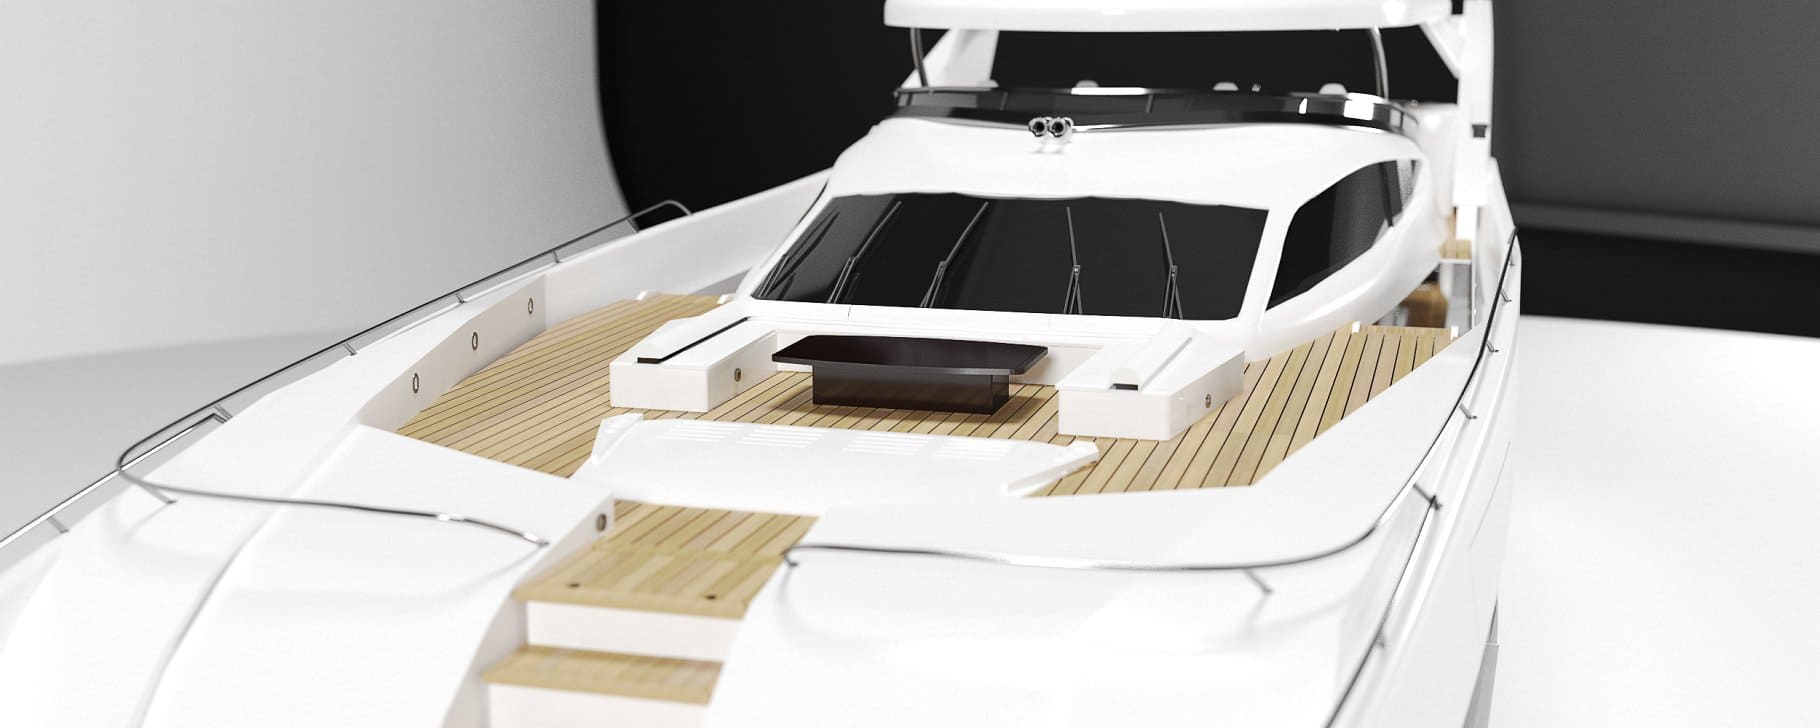 View of the upper deck and captain's bridge of the white Sunseeker predator 130 Superyacht model.